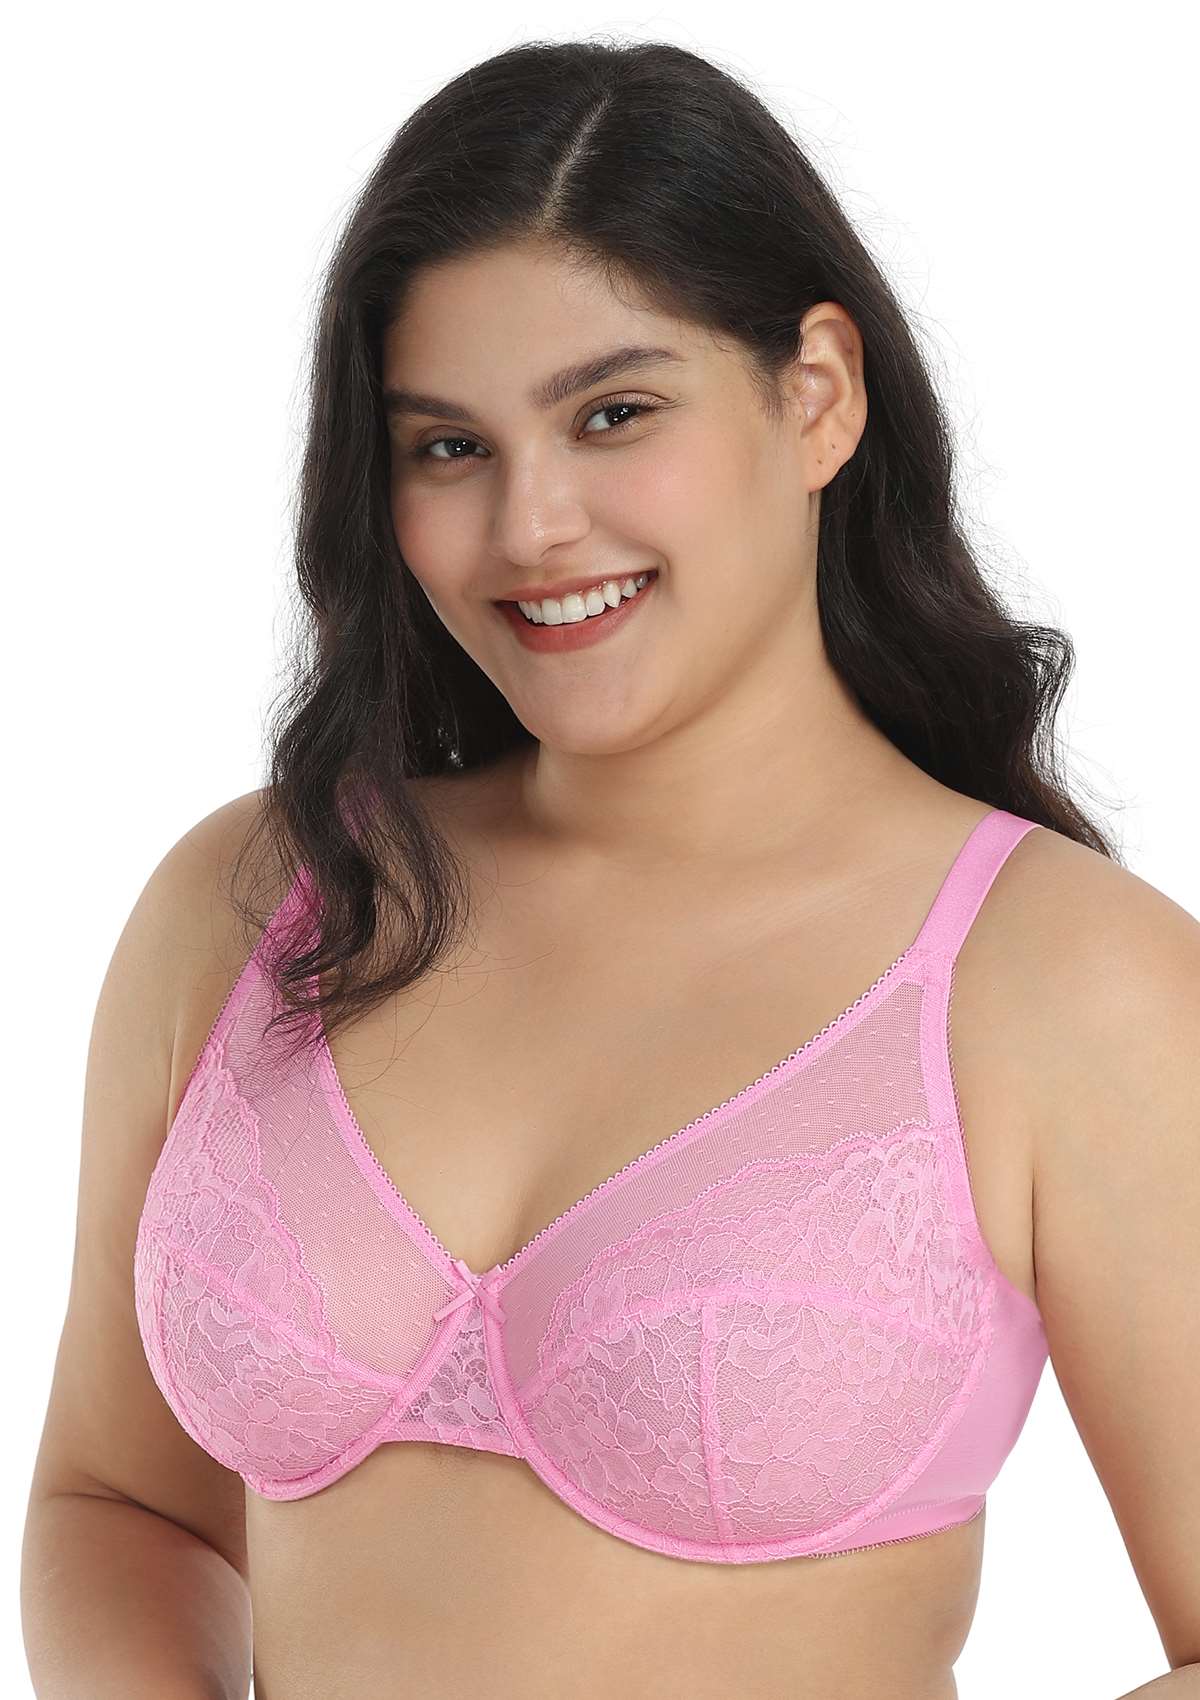 HSIA Enchante Lacy Bra: Comfy Sheer Lace Bra With Lift - Pink / 40 / D